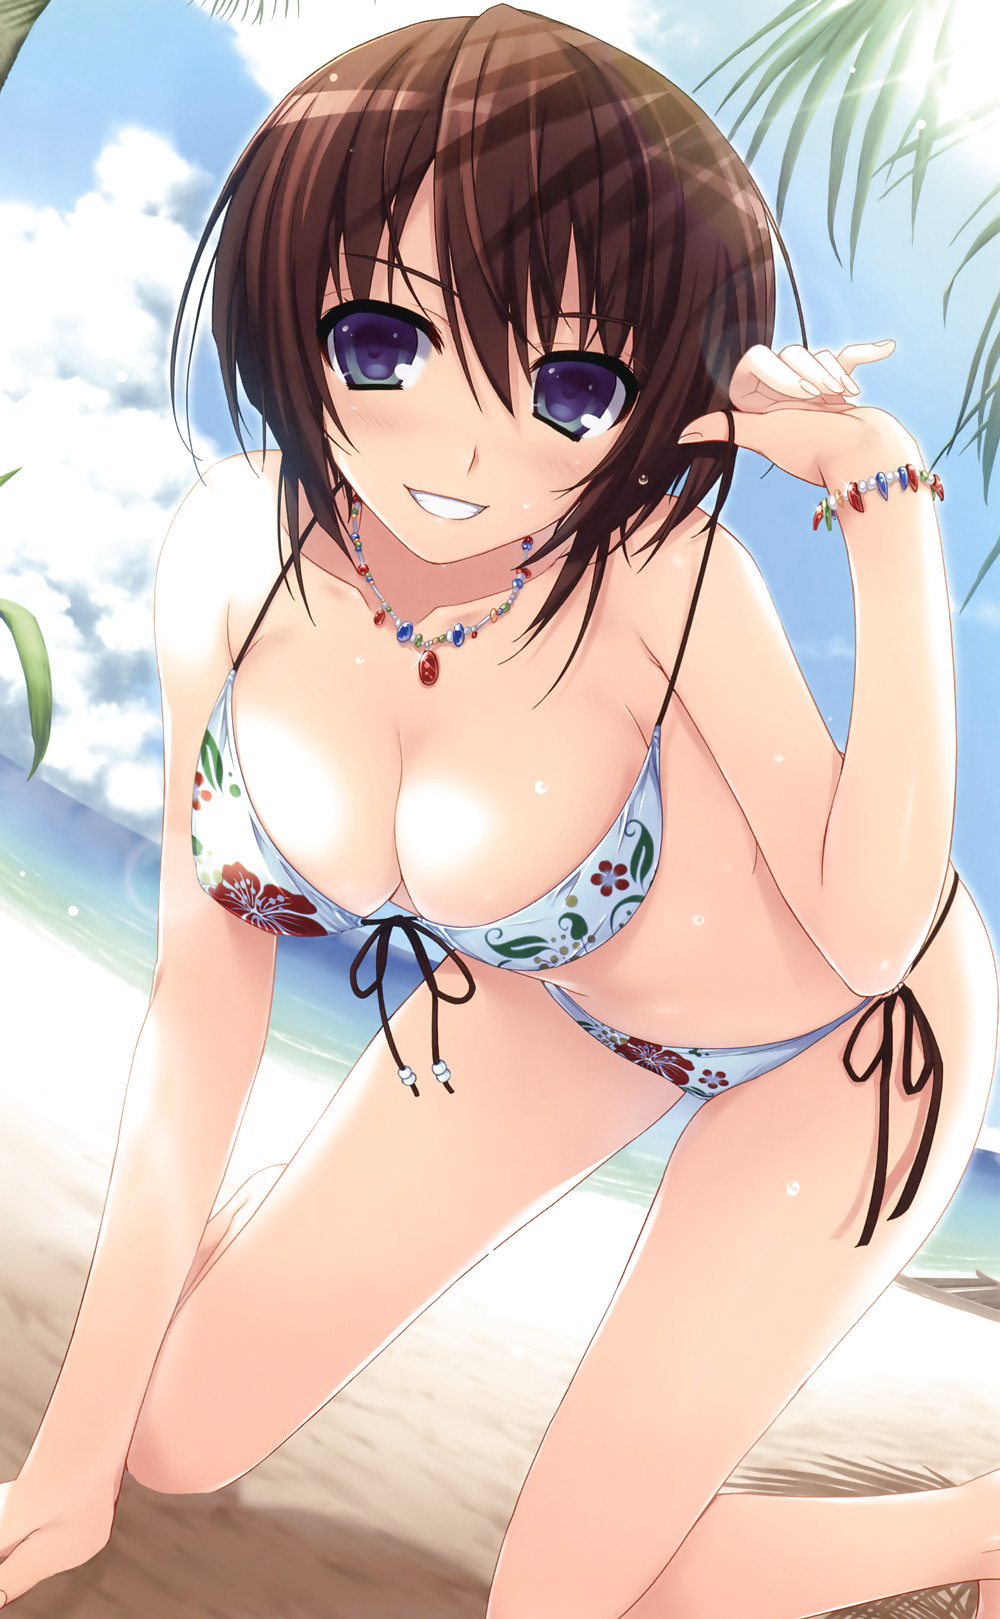 Anime girls in swimsuits #26275163